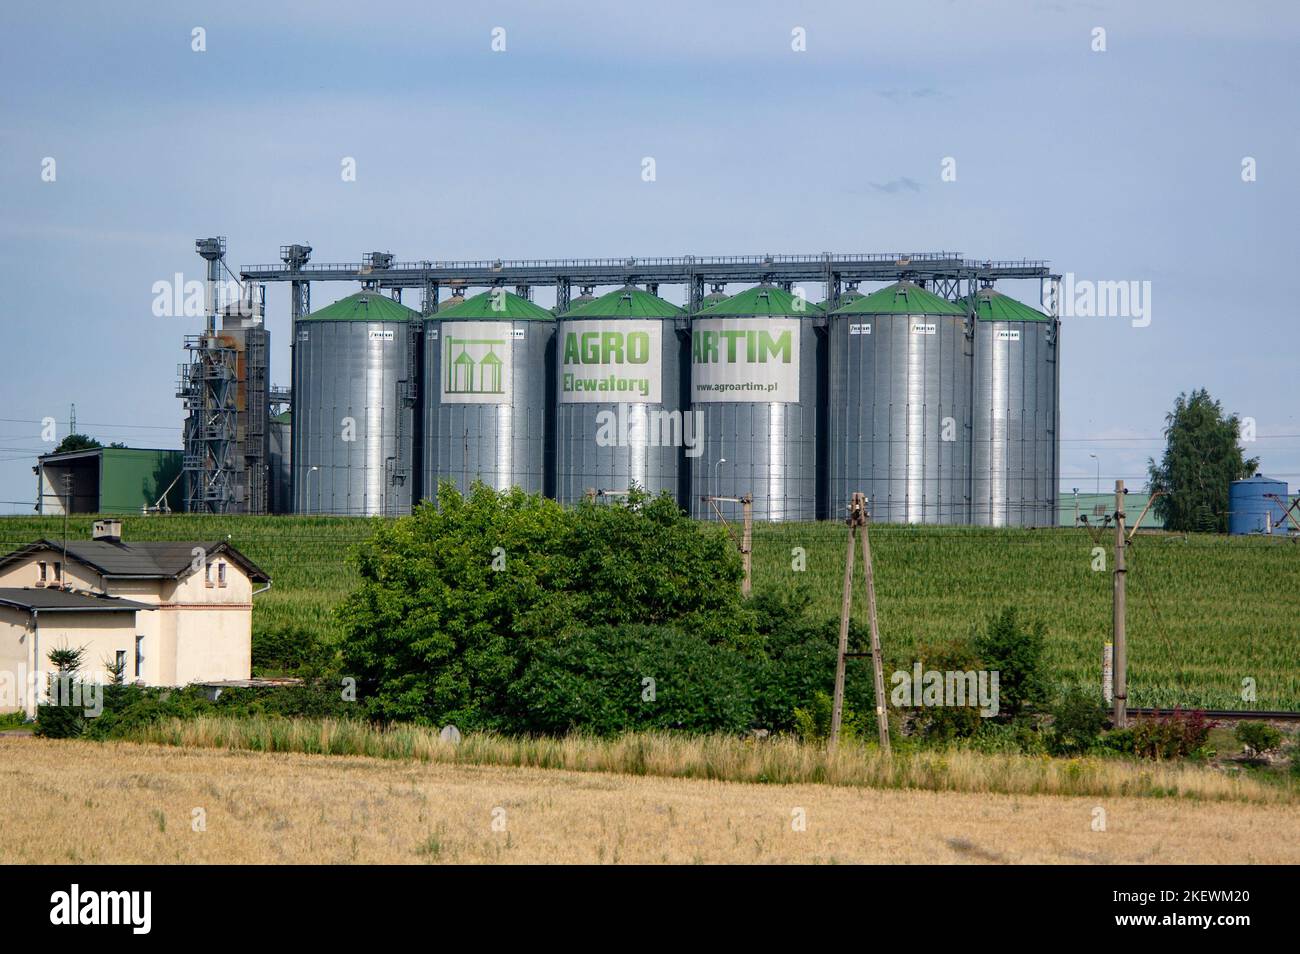 WARLUBIE, POLAND - JULY 29, 2022: Agro Artim Elewatory buildings of company producing raw material storehouses with 10 silo elevators Stock Photo